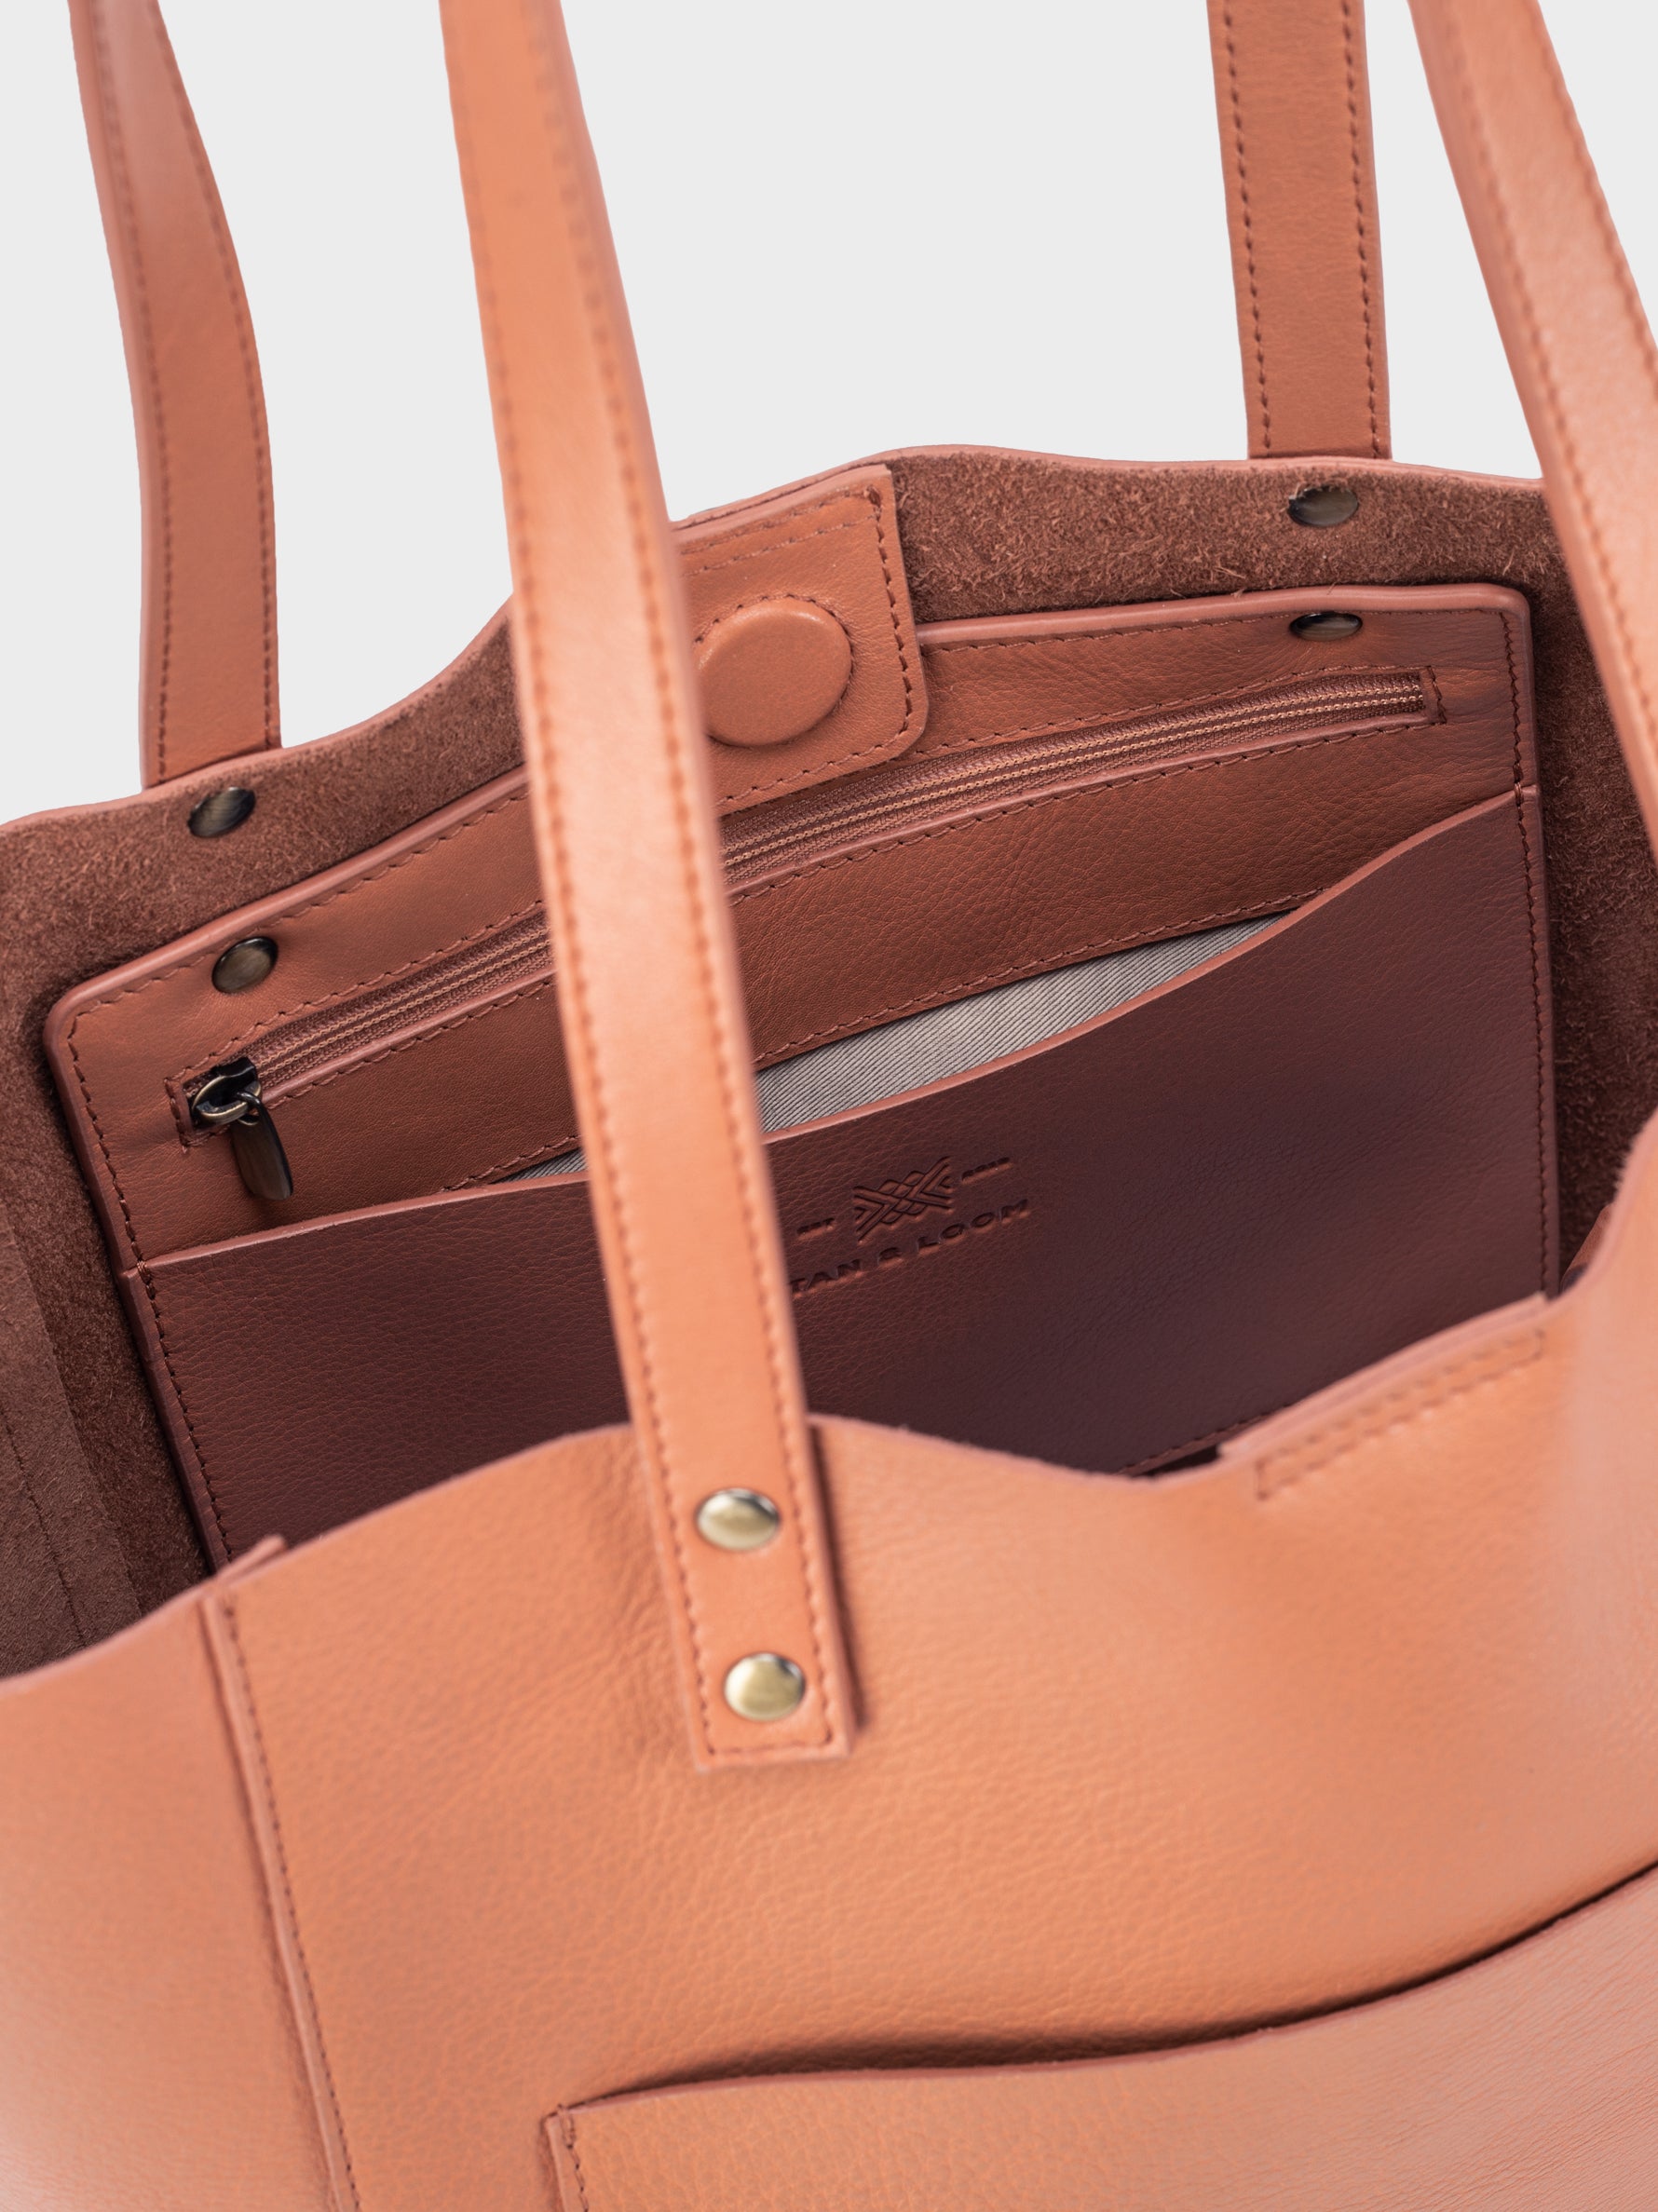 Handcrafted Genuine Vegetable Tanned Leather Old Fashioned Tote Regular Dusty Peach for Women Tan & Loom